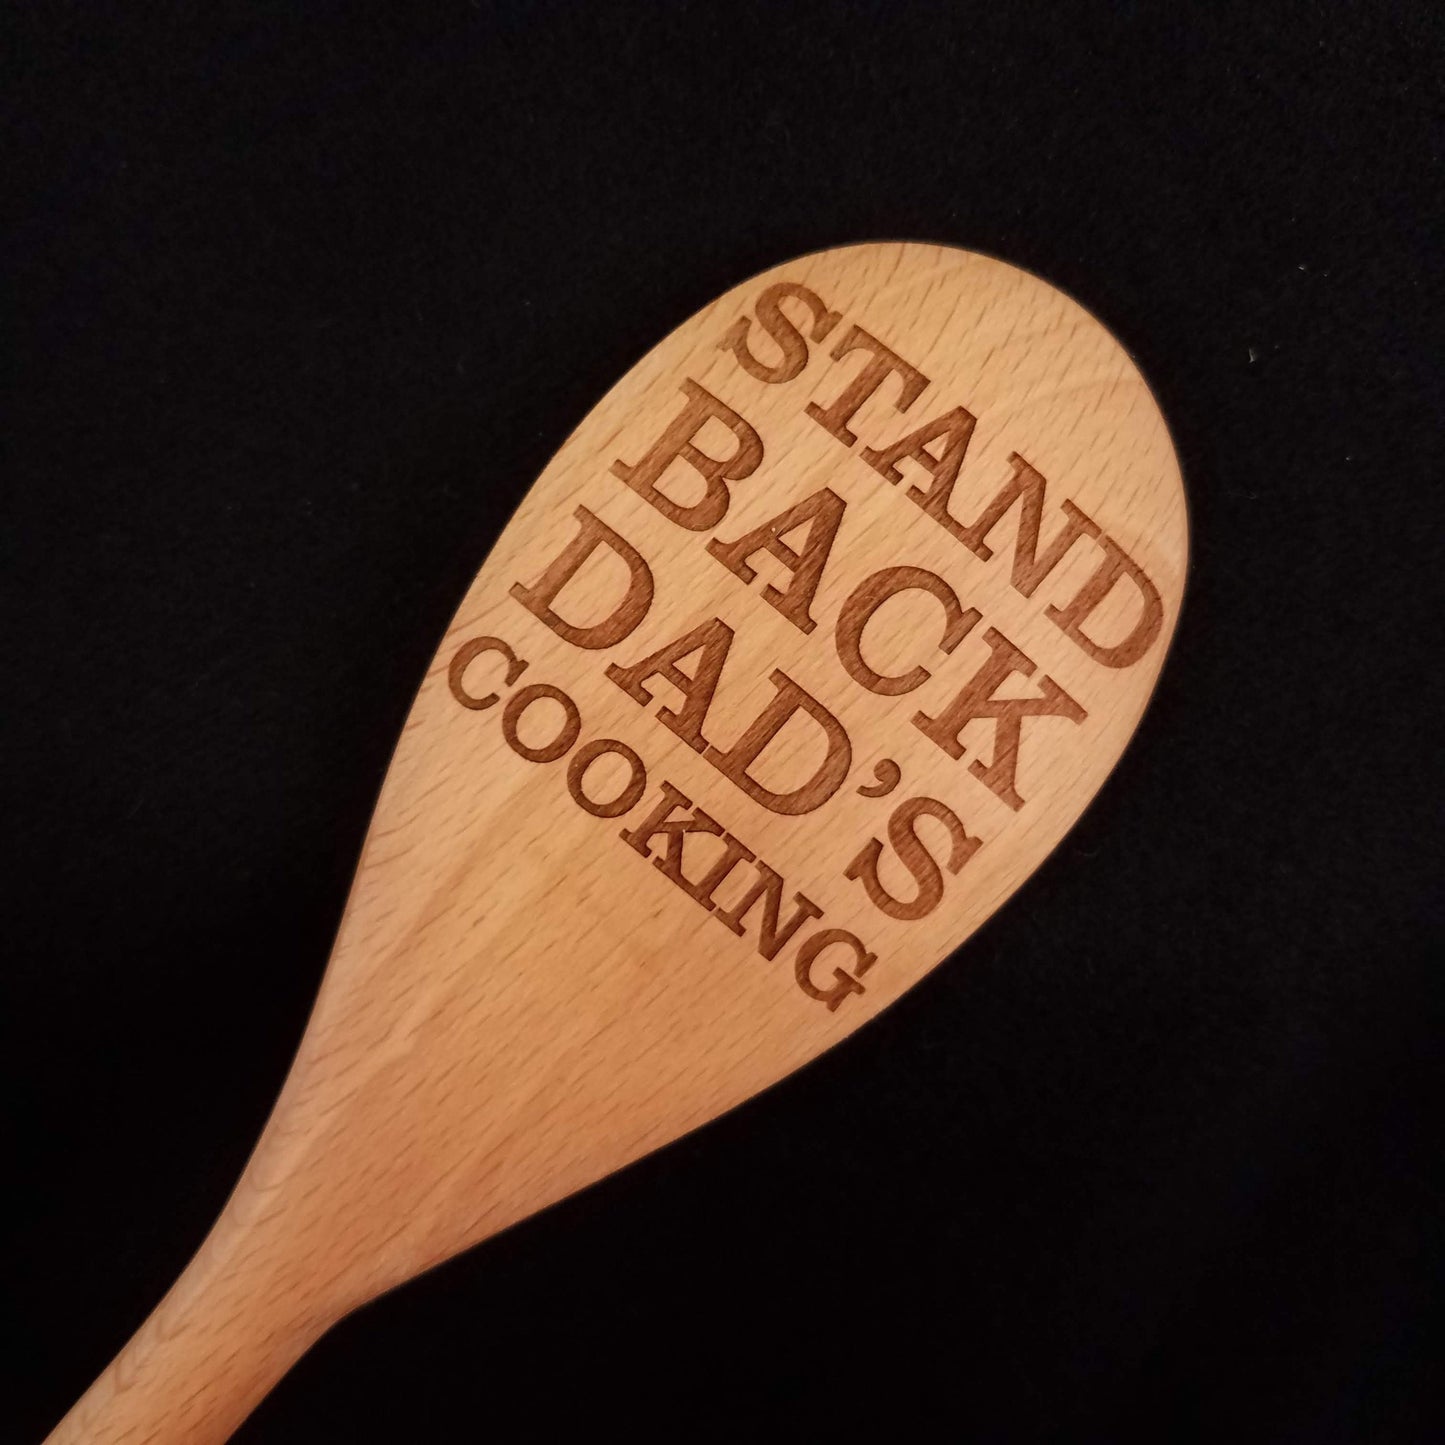 Customizable beech wood spoon laser engraved with Stand Back Dad's Cooking